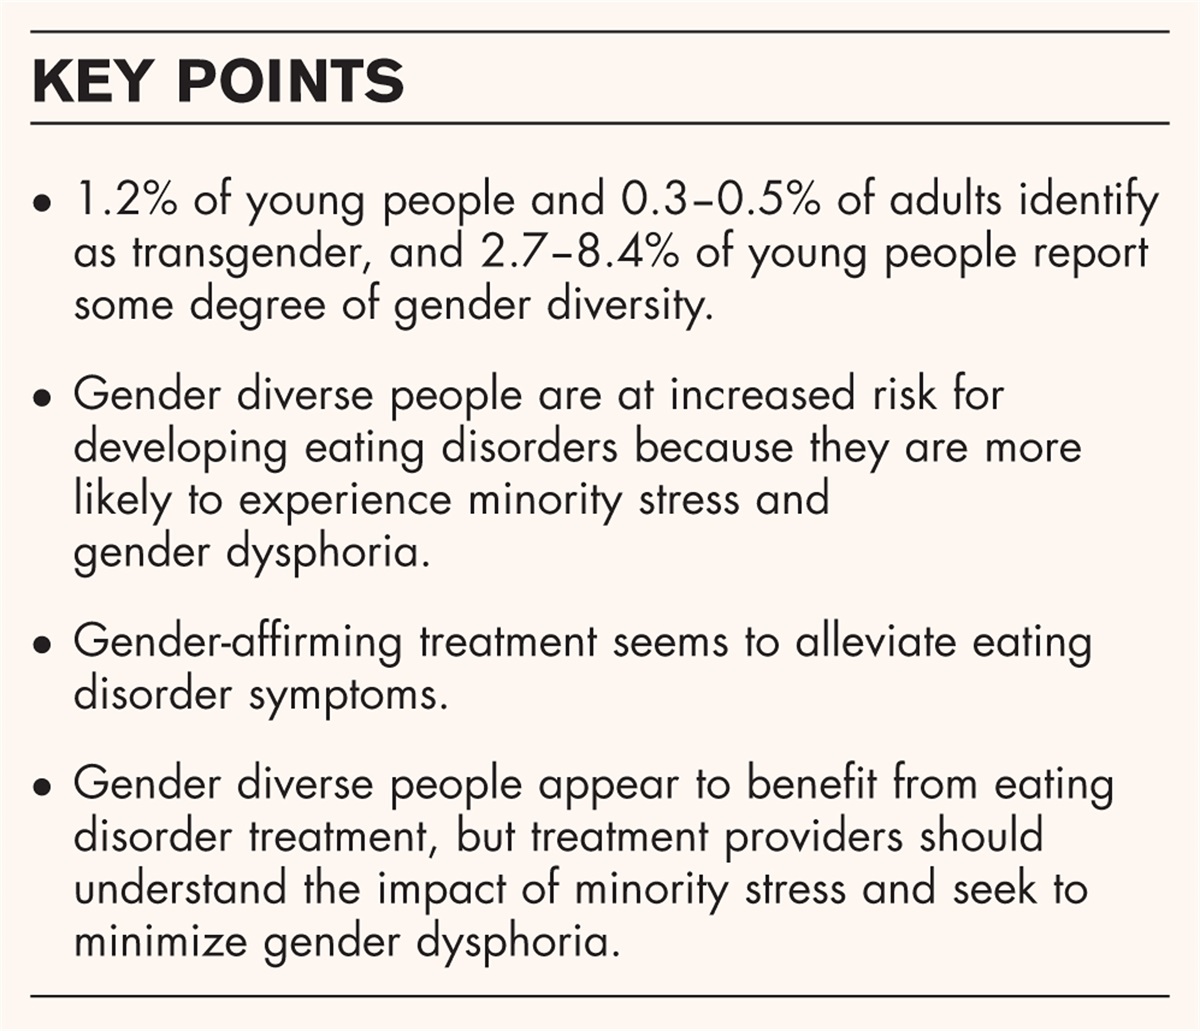 Eating disorders in transgender and gender diverse people: characteristics, assessment, and management